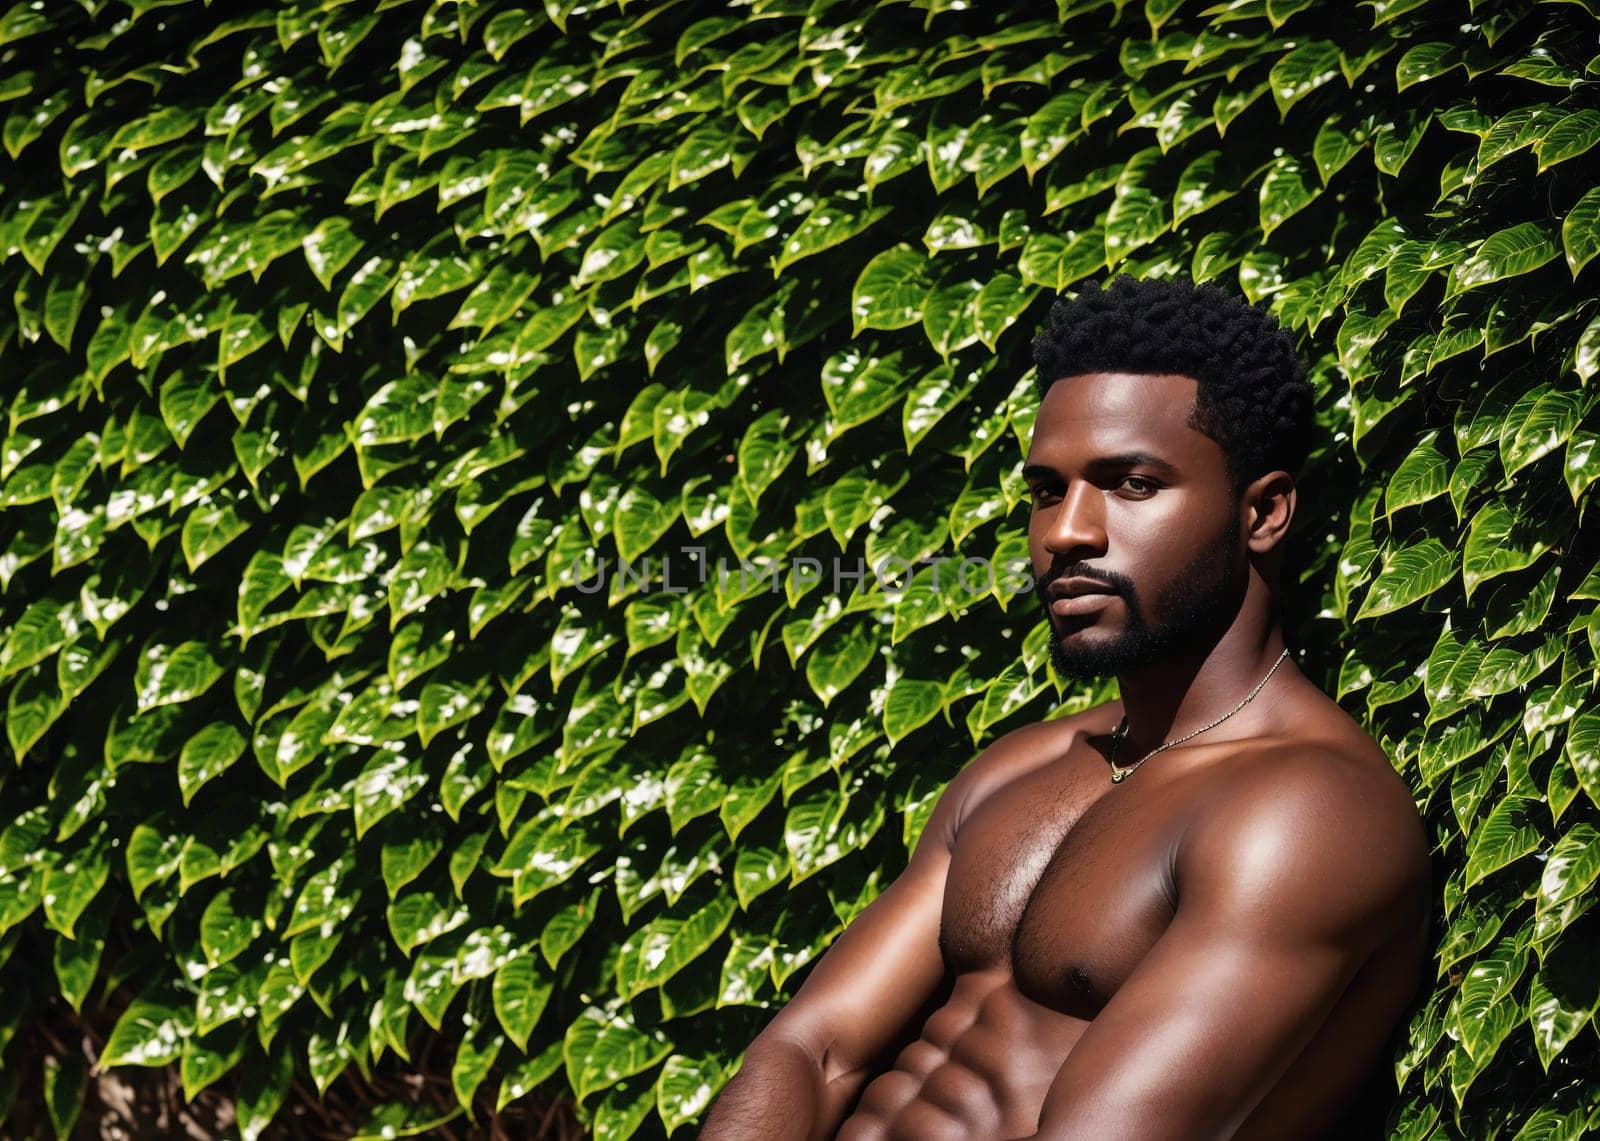 The image shows a shirtless man sitting on the ground in front of a green background with leaves.